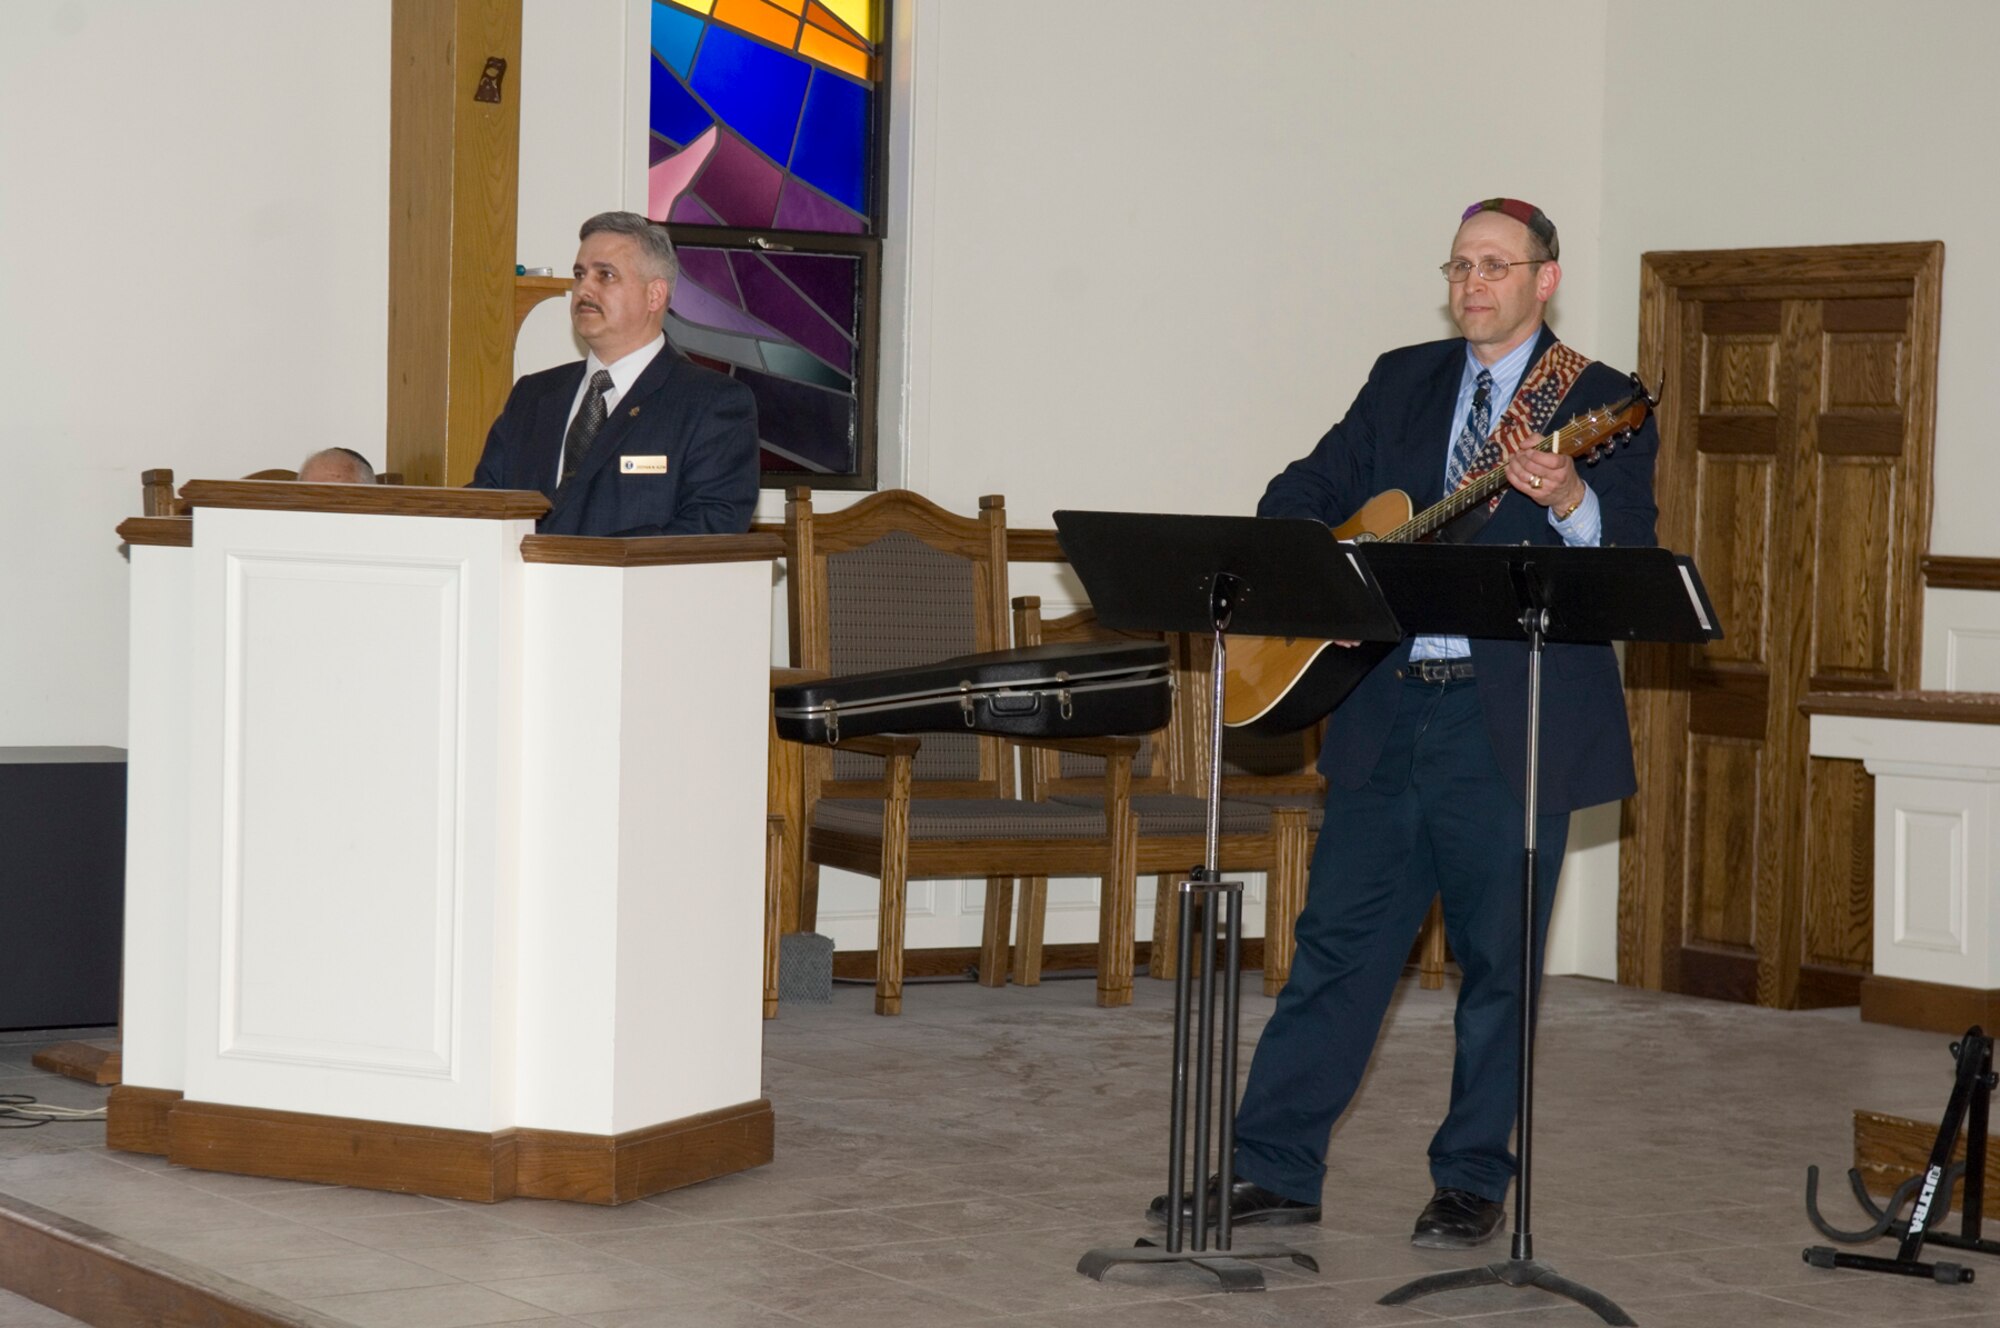 HANSCOM AIR FORCE BASE, Mass. –Stephen Klein (left), speaks during the Holocaust Remembrance event at the Base Chapel on April 28, while Howard Worona (right), Hanscom Middle School music specialist prepares to lead the musical tributes for the event. The event honored and remembered the lives of the Shtetl, the small Jewish communities of Eastern Europe, prior to and after Kristallnacht, the night of the broken glass. Kristallnacht marked the beginning of the systematic extermination of more than six million Jews. (U.S. Air Force photo by Rick Berry) 